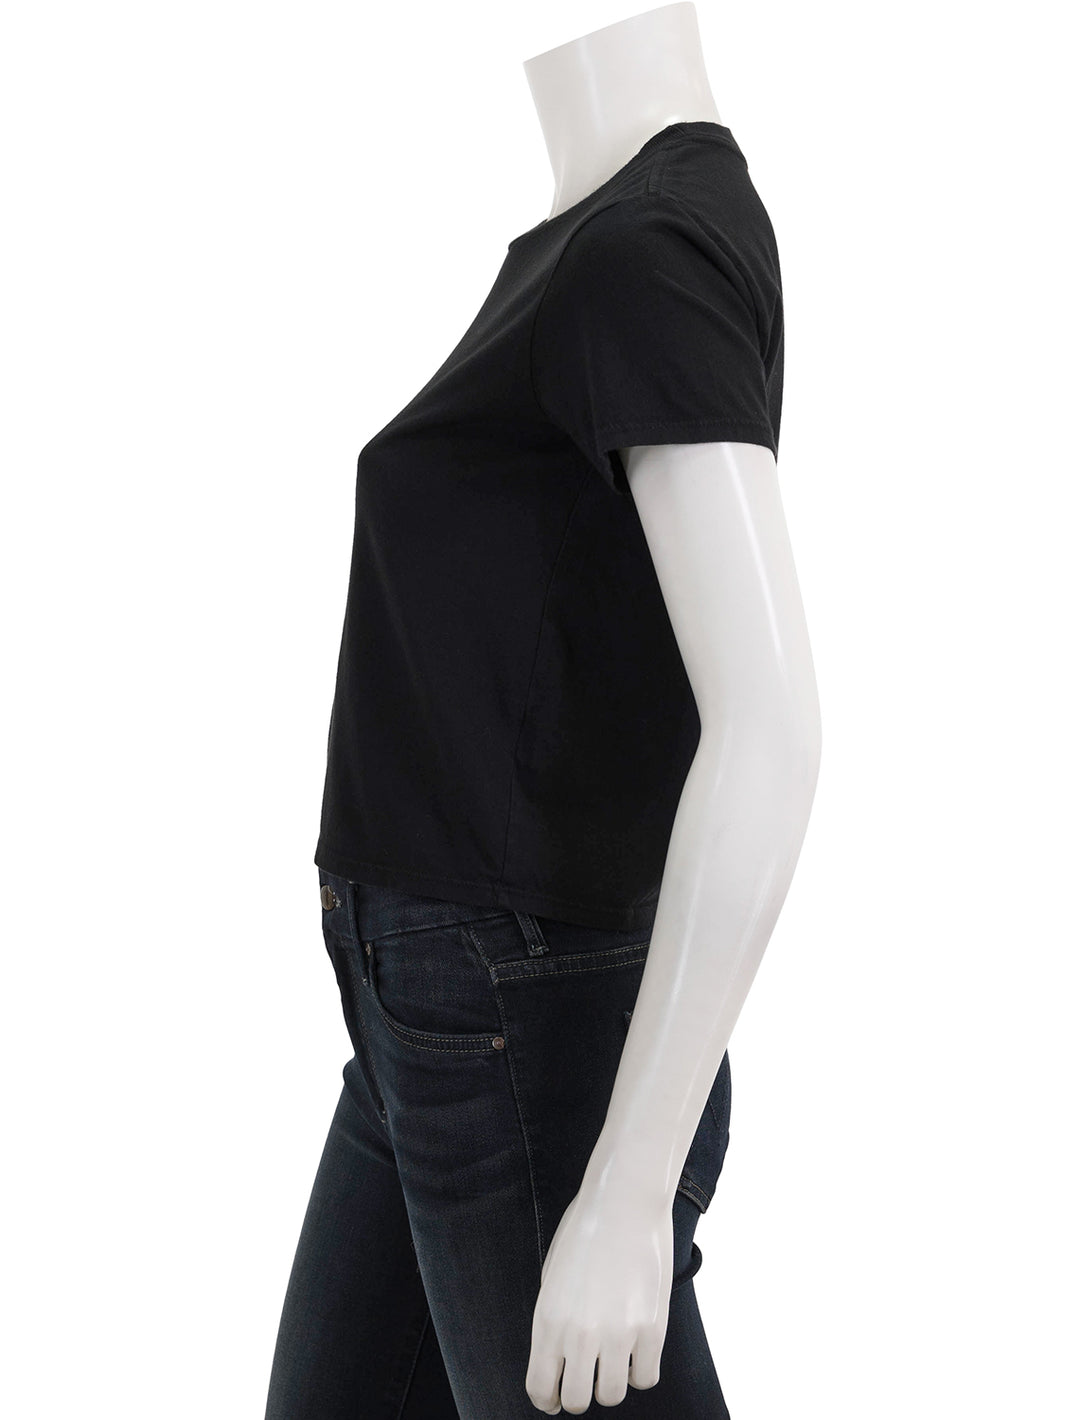 Side view of Perfectwhitetee's springsteen tee in true black.